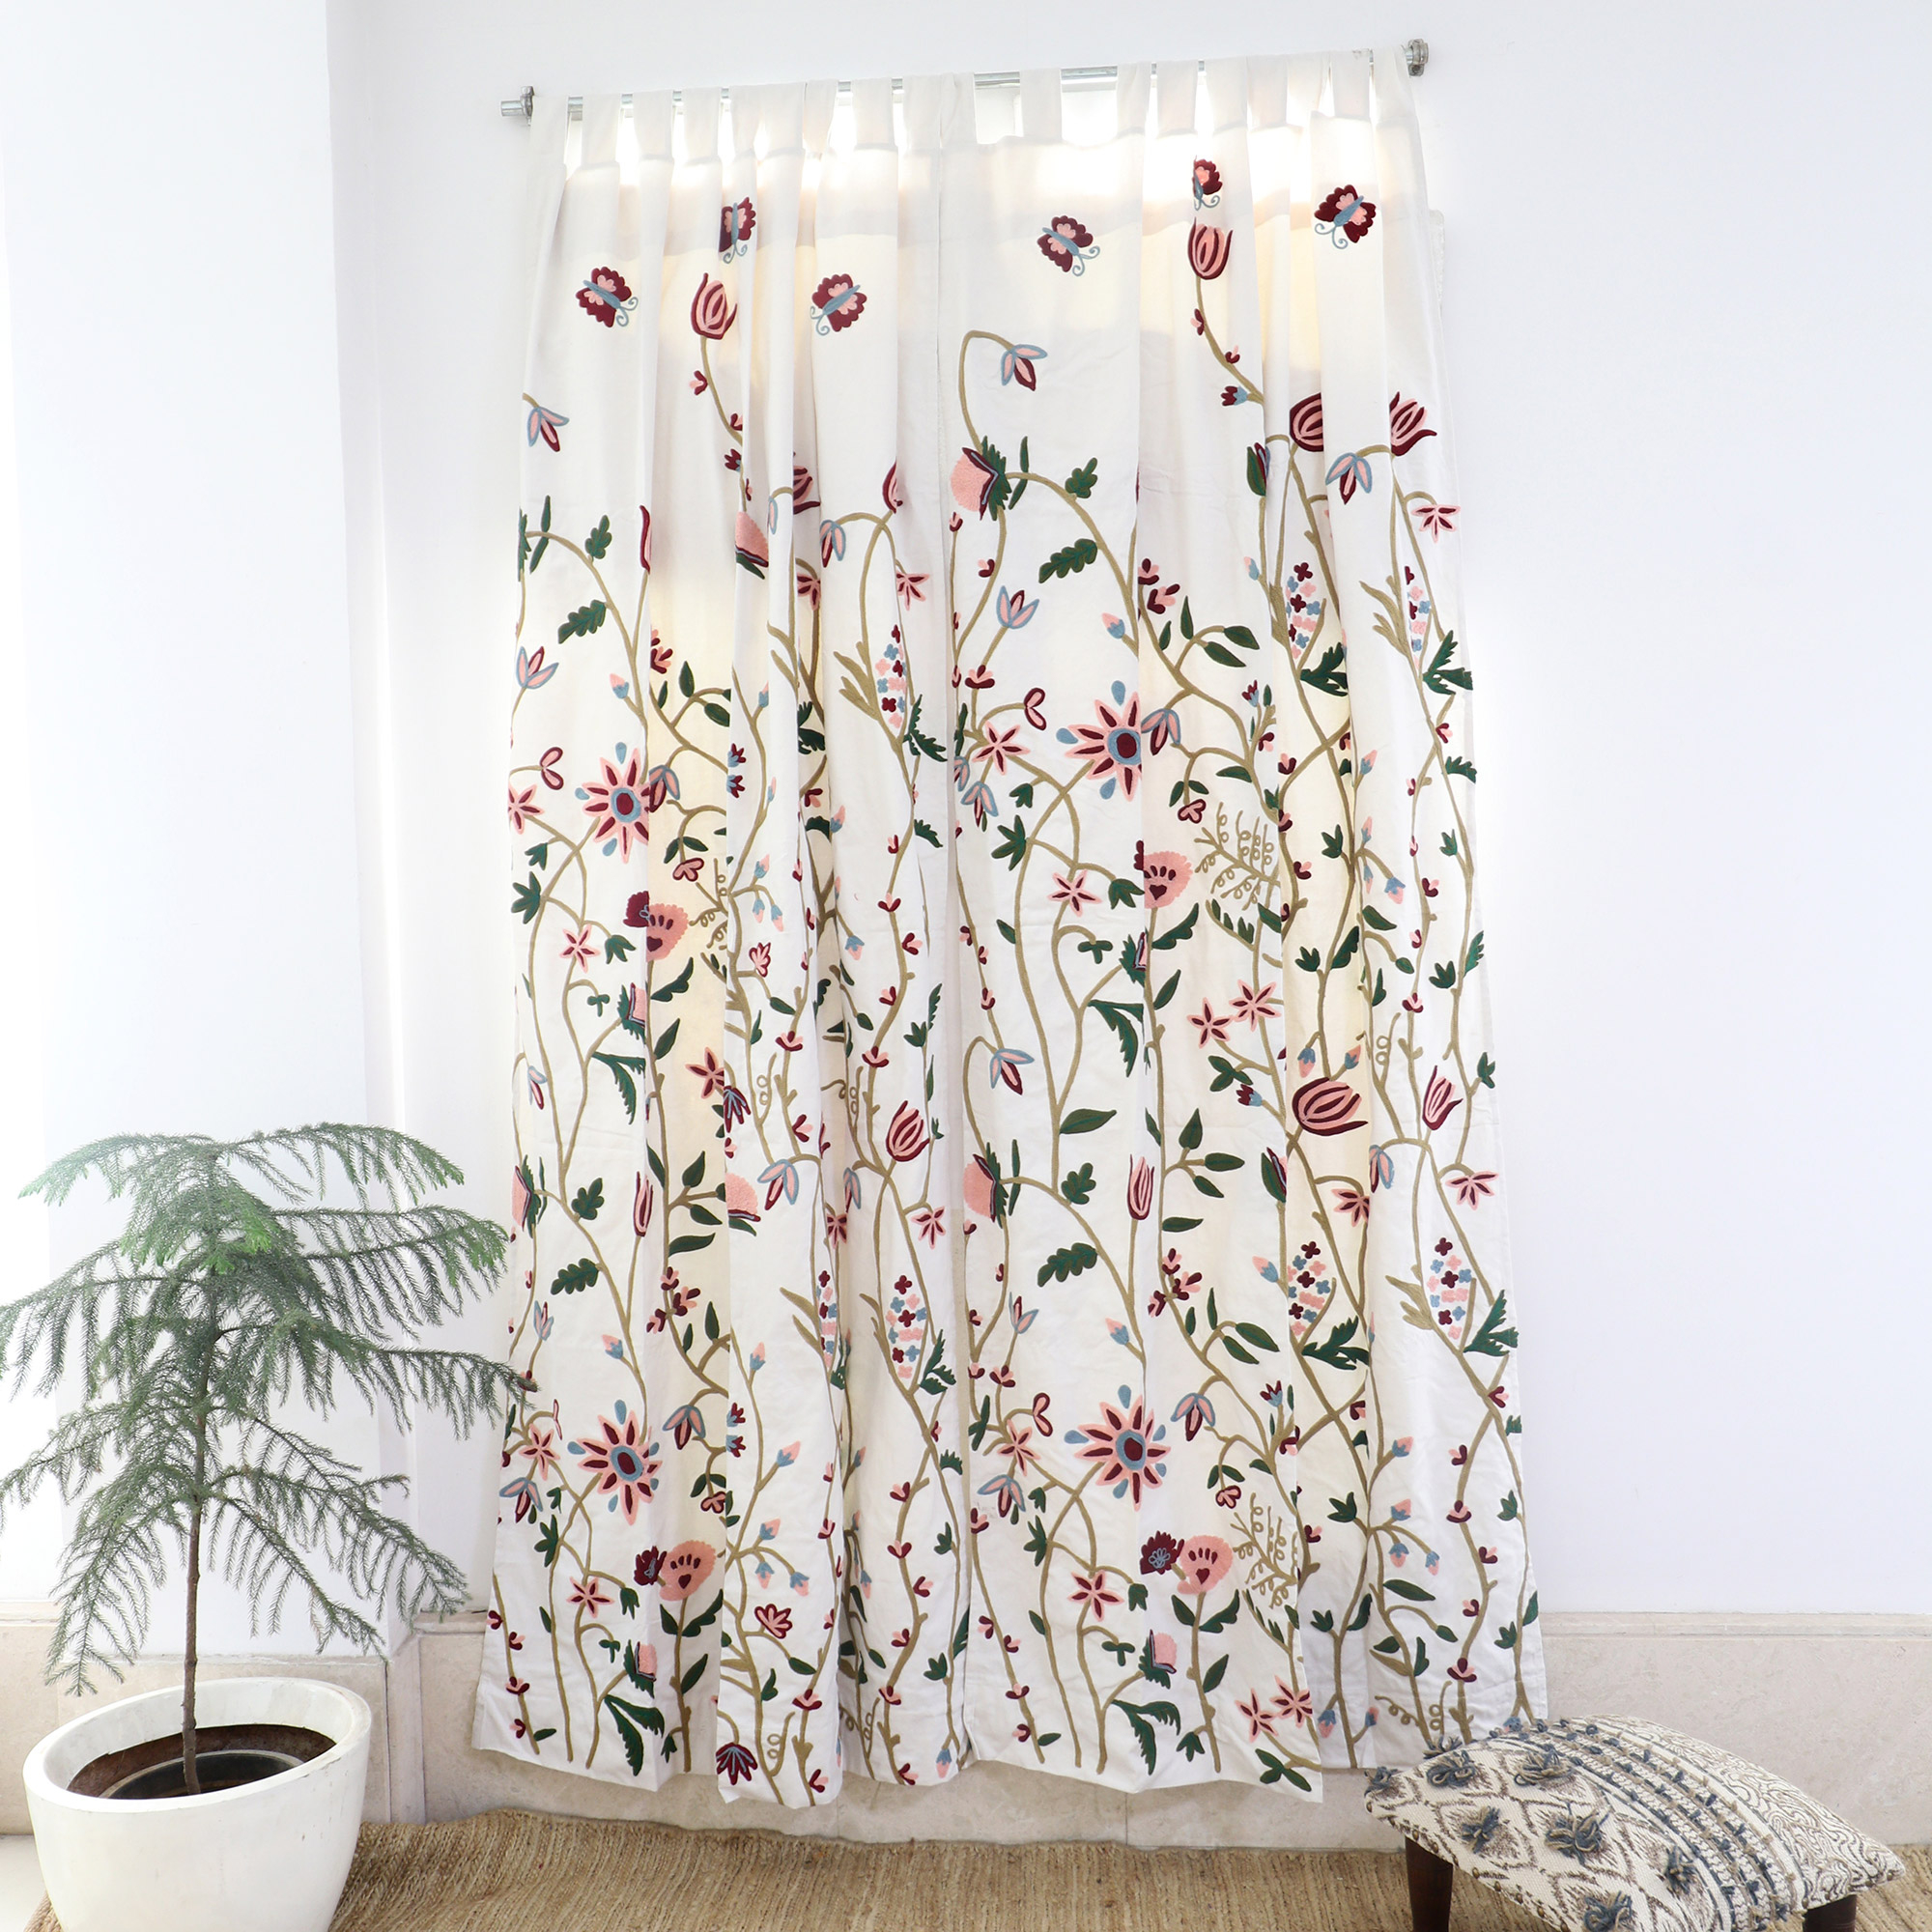 2 Floral Embroidered Cotton Curtains Handmade in India - Kashmir Bloom